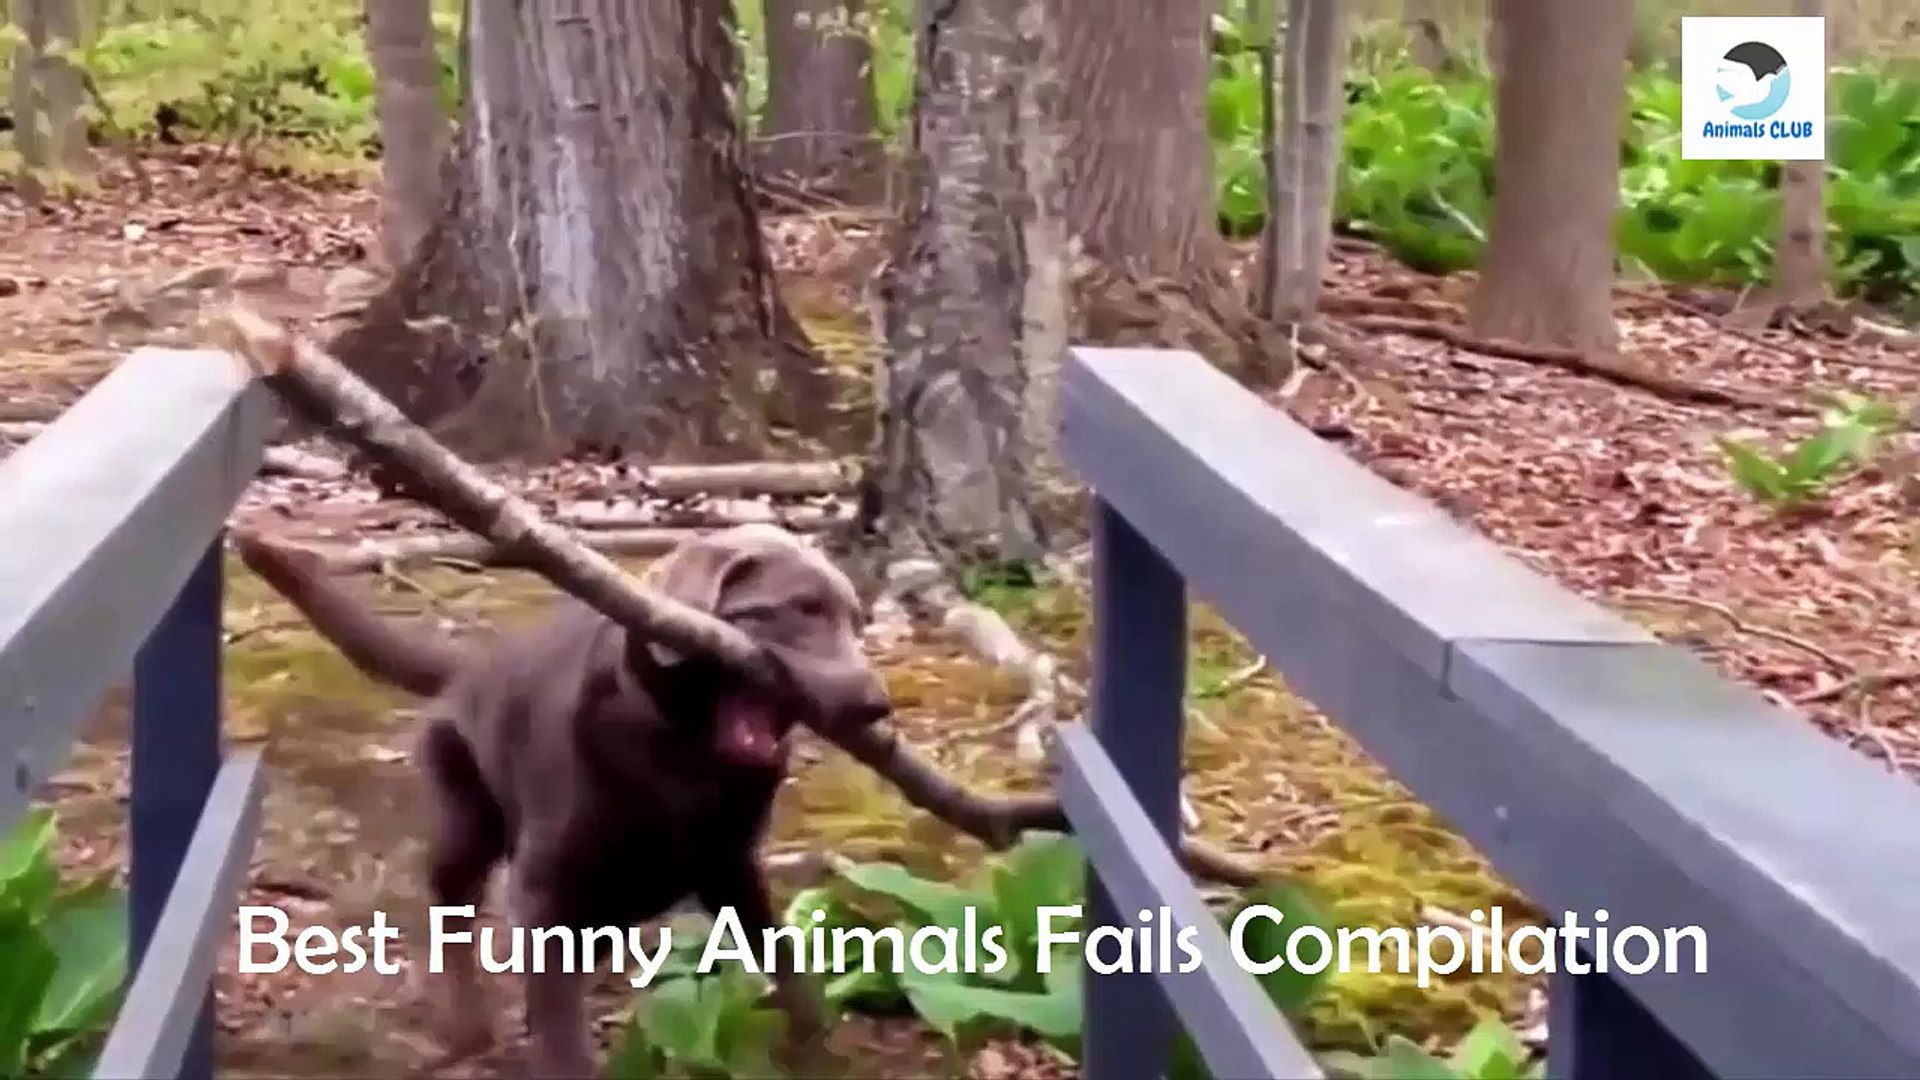 Funny Pets Video ► Funny Animals Fails Compilation ► Animals CLUB